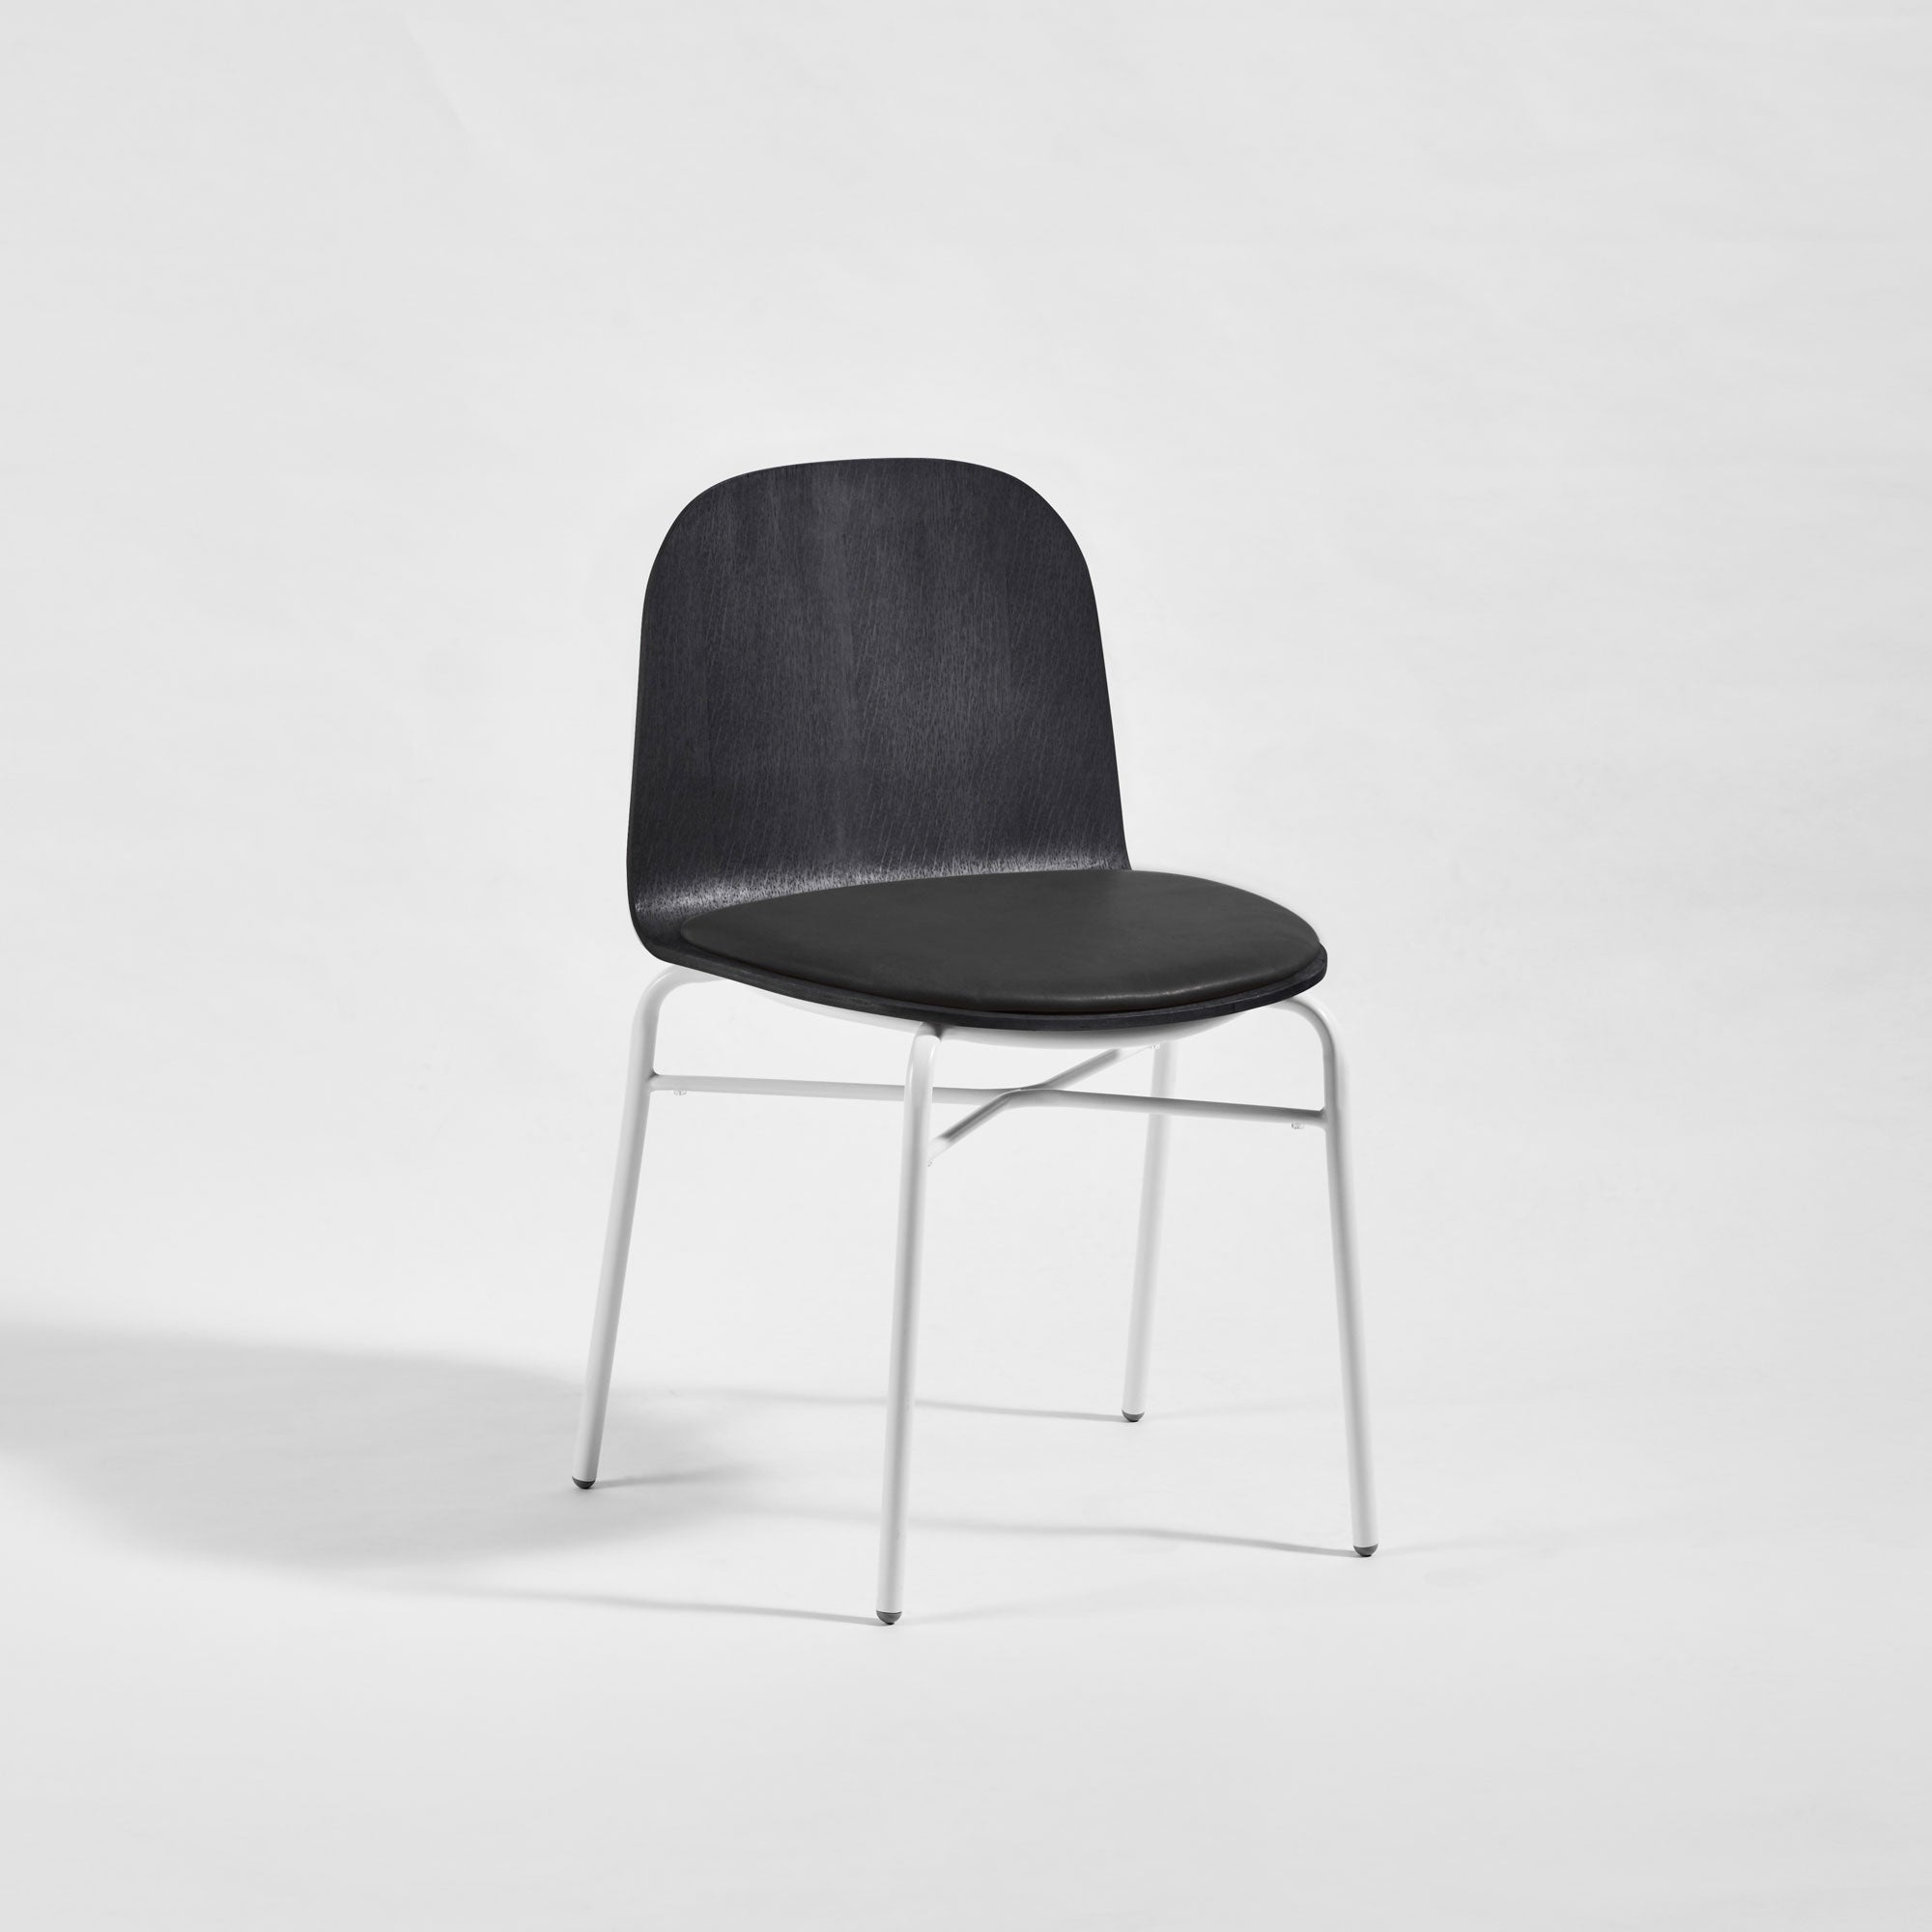 Potato Chair | Stacking Timber & Upholstered Dining Office Chair with Handle | GibsonKarlo | DesignByThem  ** HF2 Lariat (Vinyl) - 006 Black